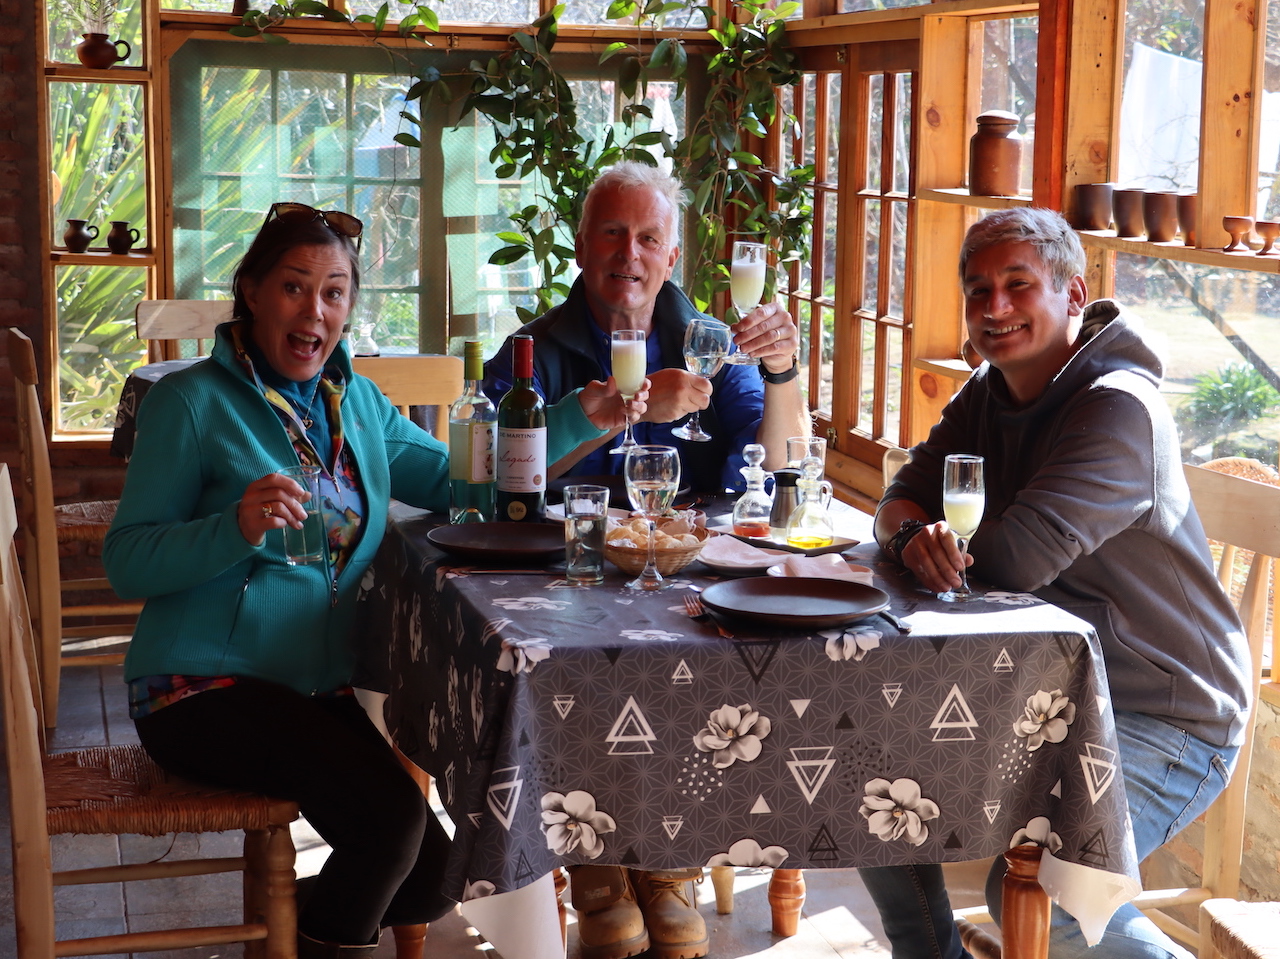 Bike wine tour - Lunch at the country house